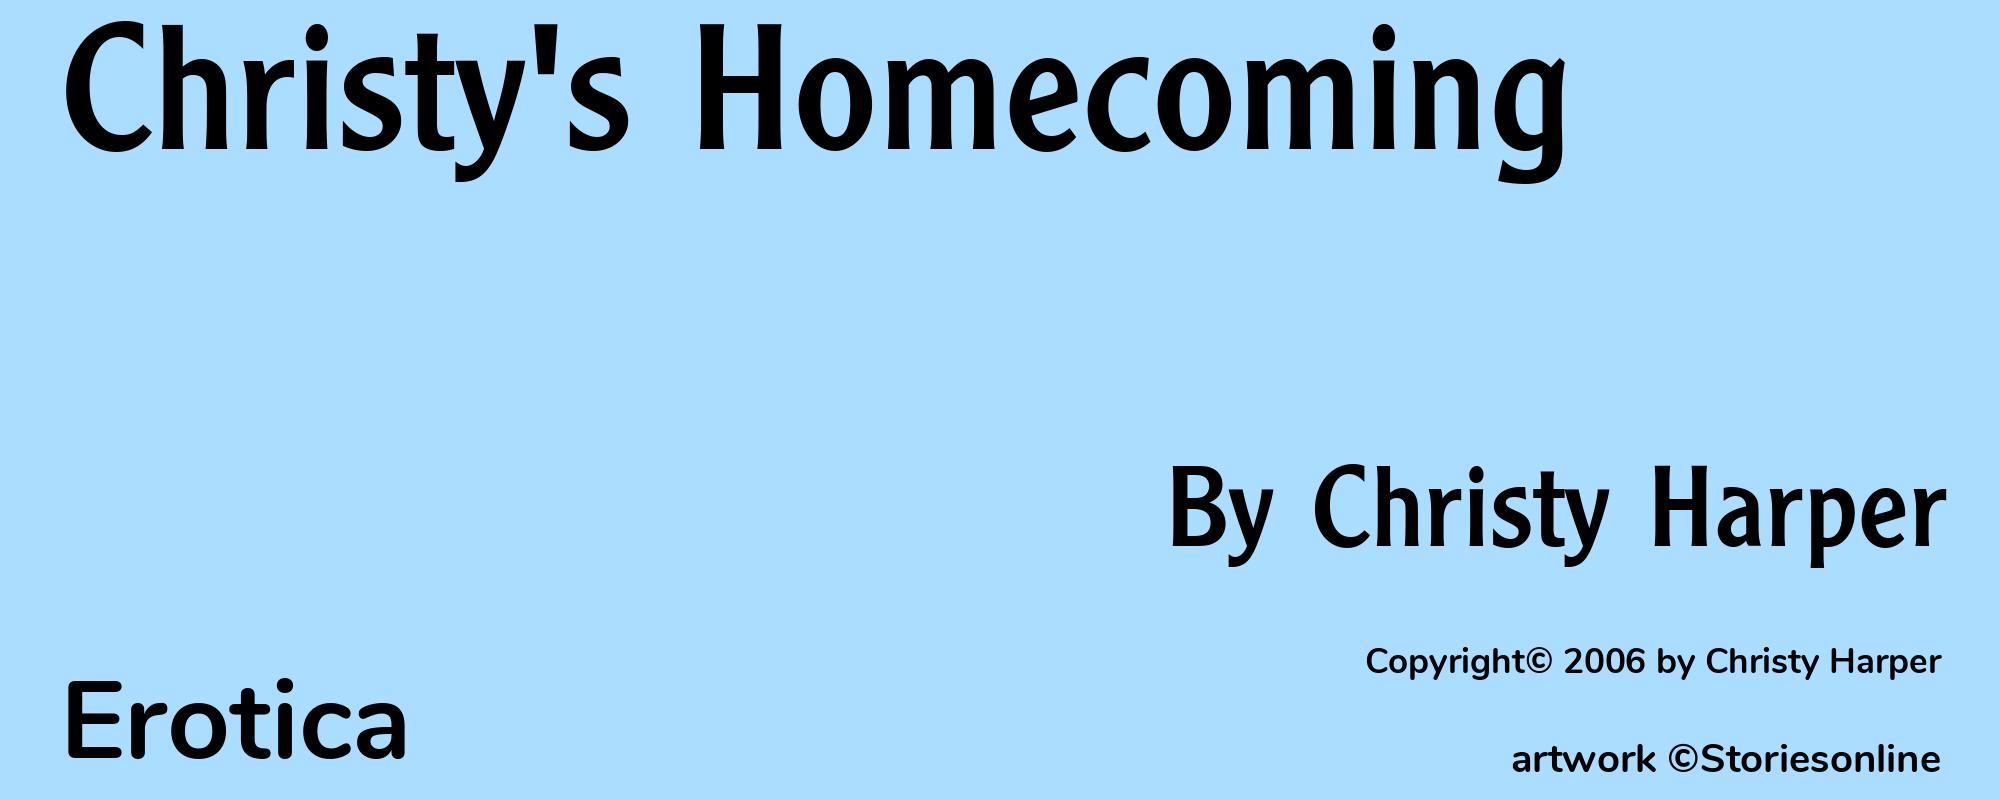 Christy's Homecoming - Cover